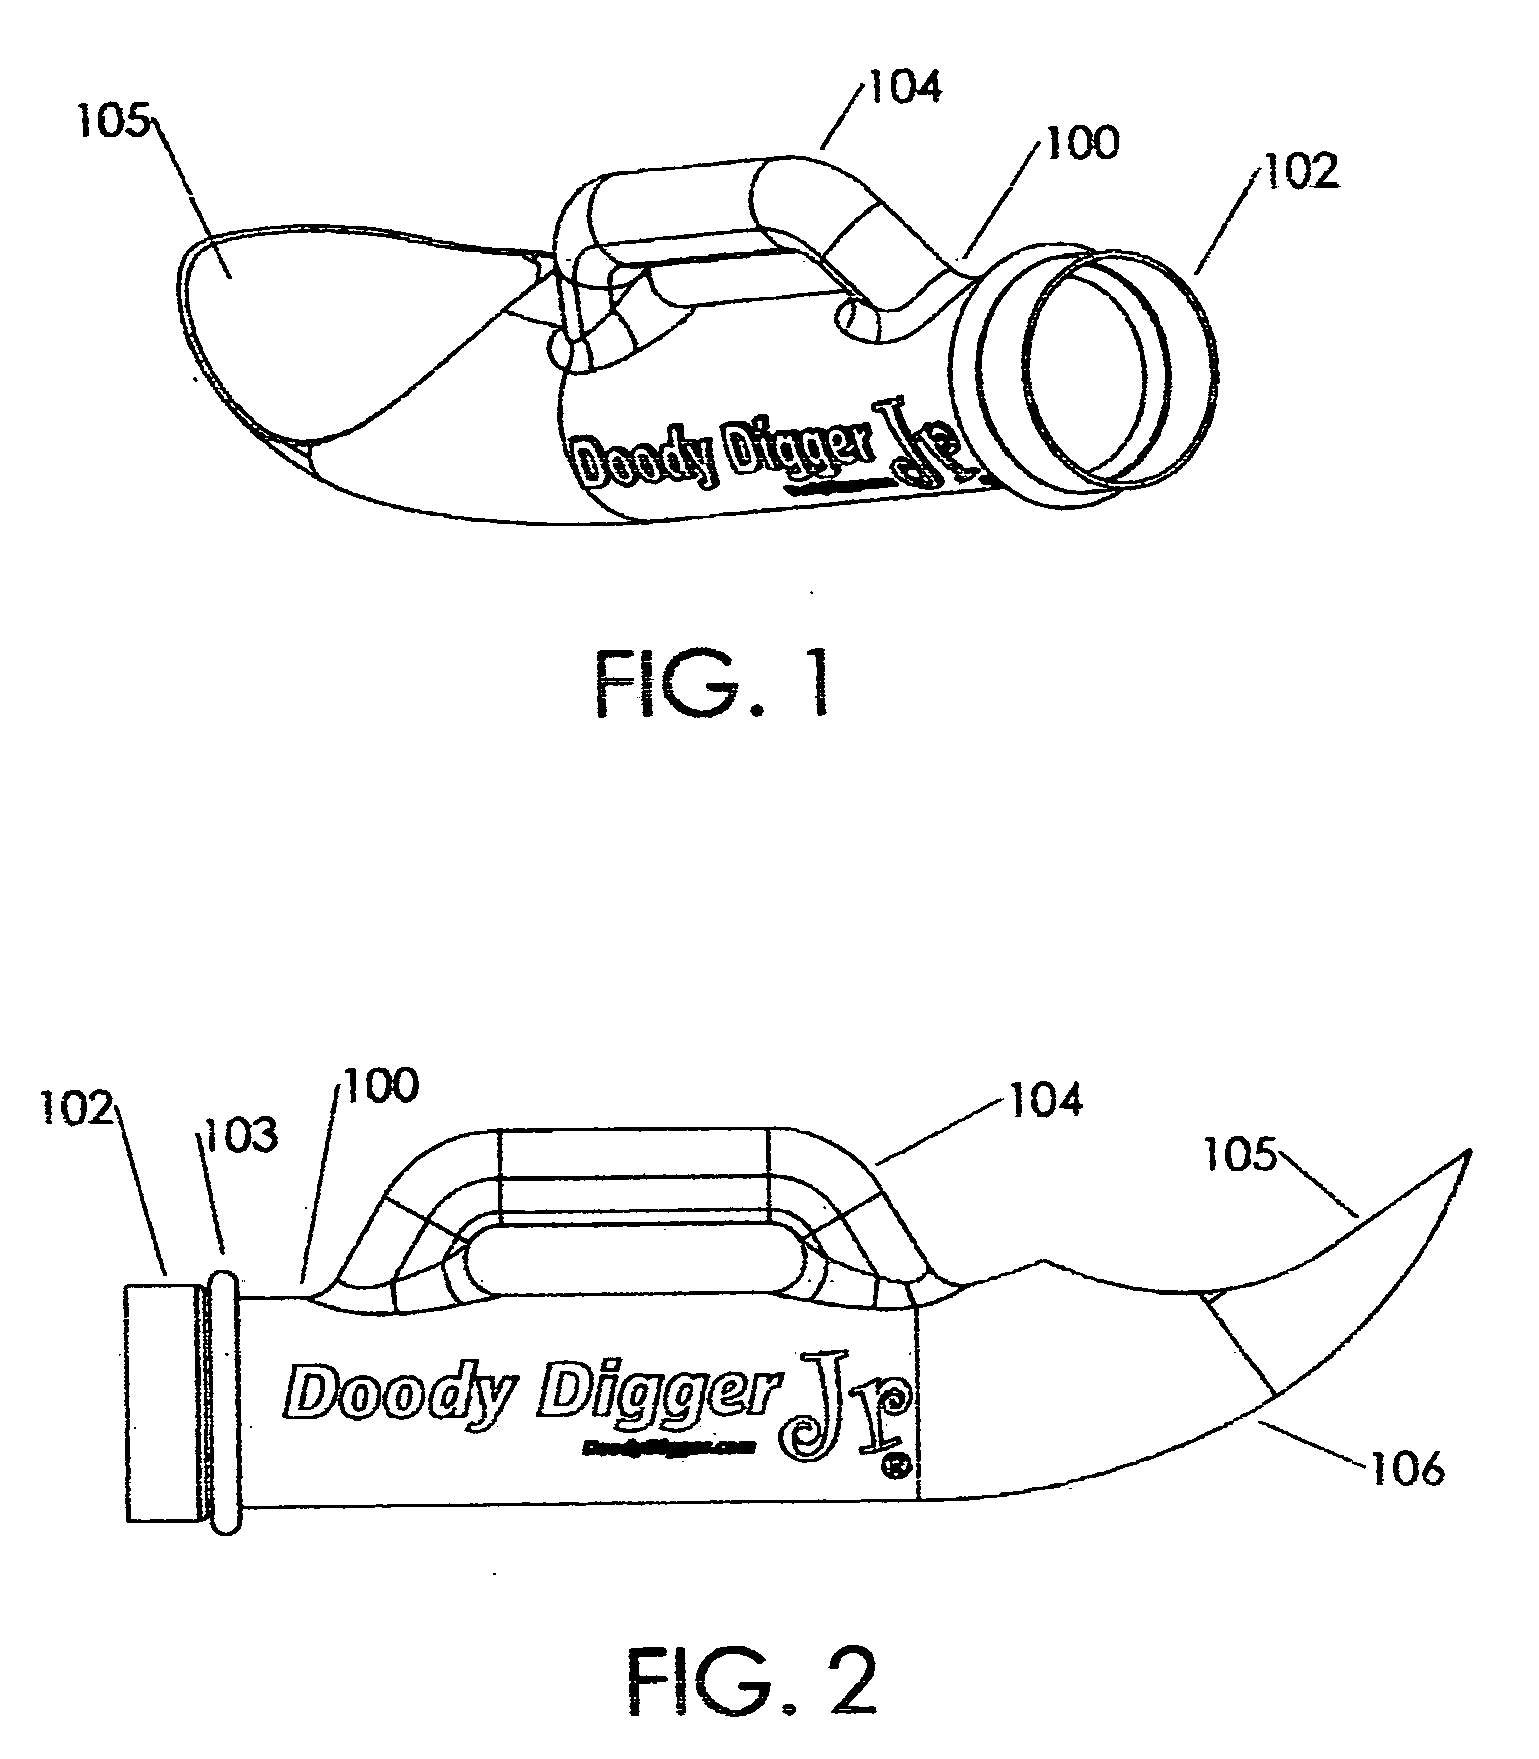 Device for the collection and disposal of animal waste